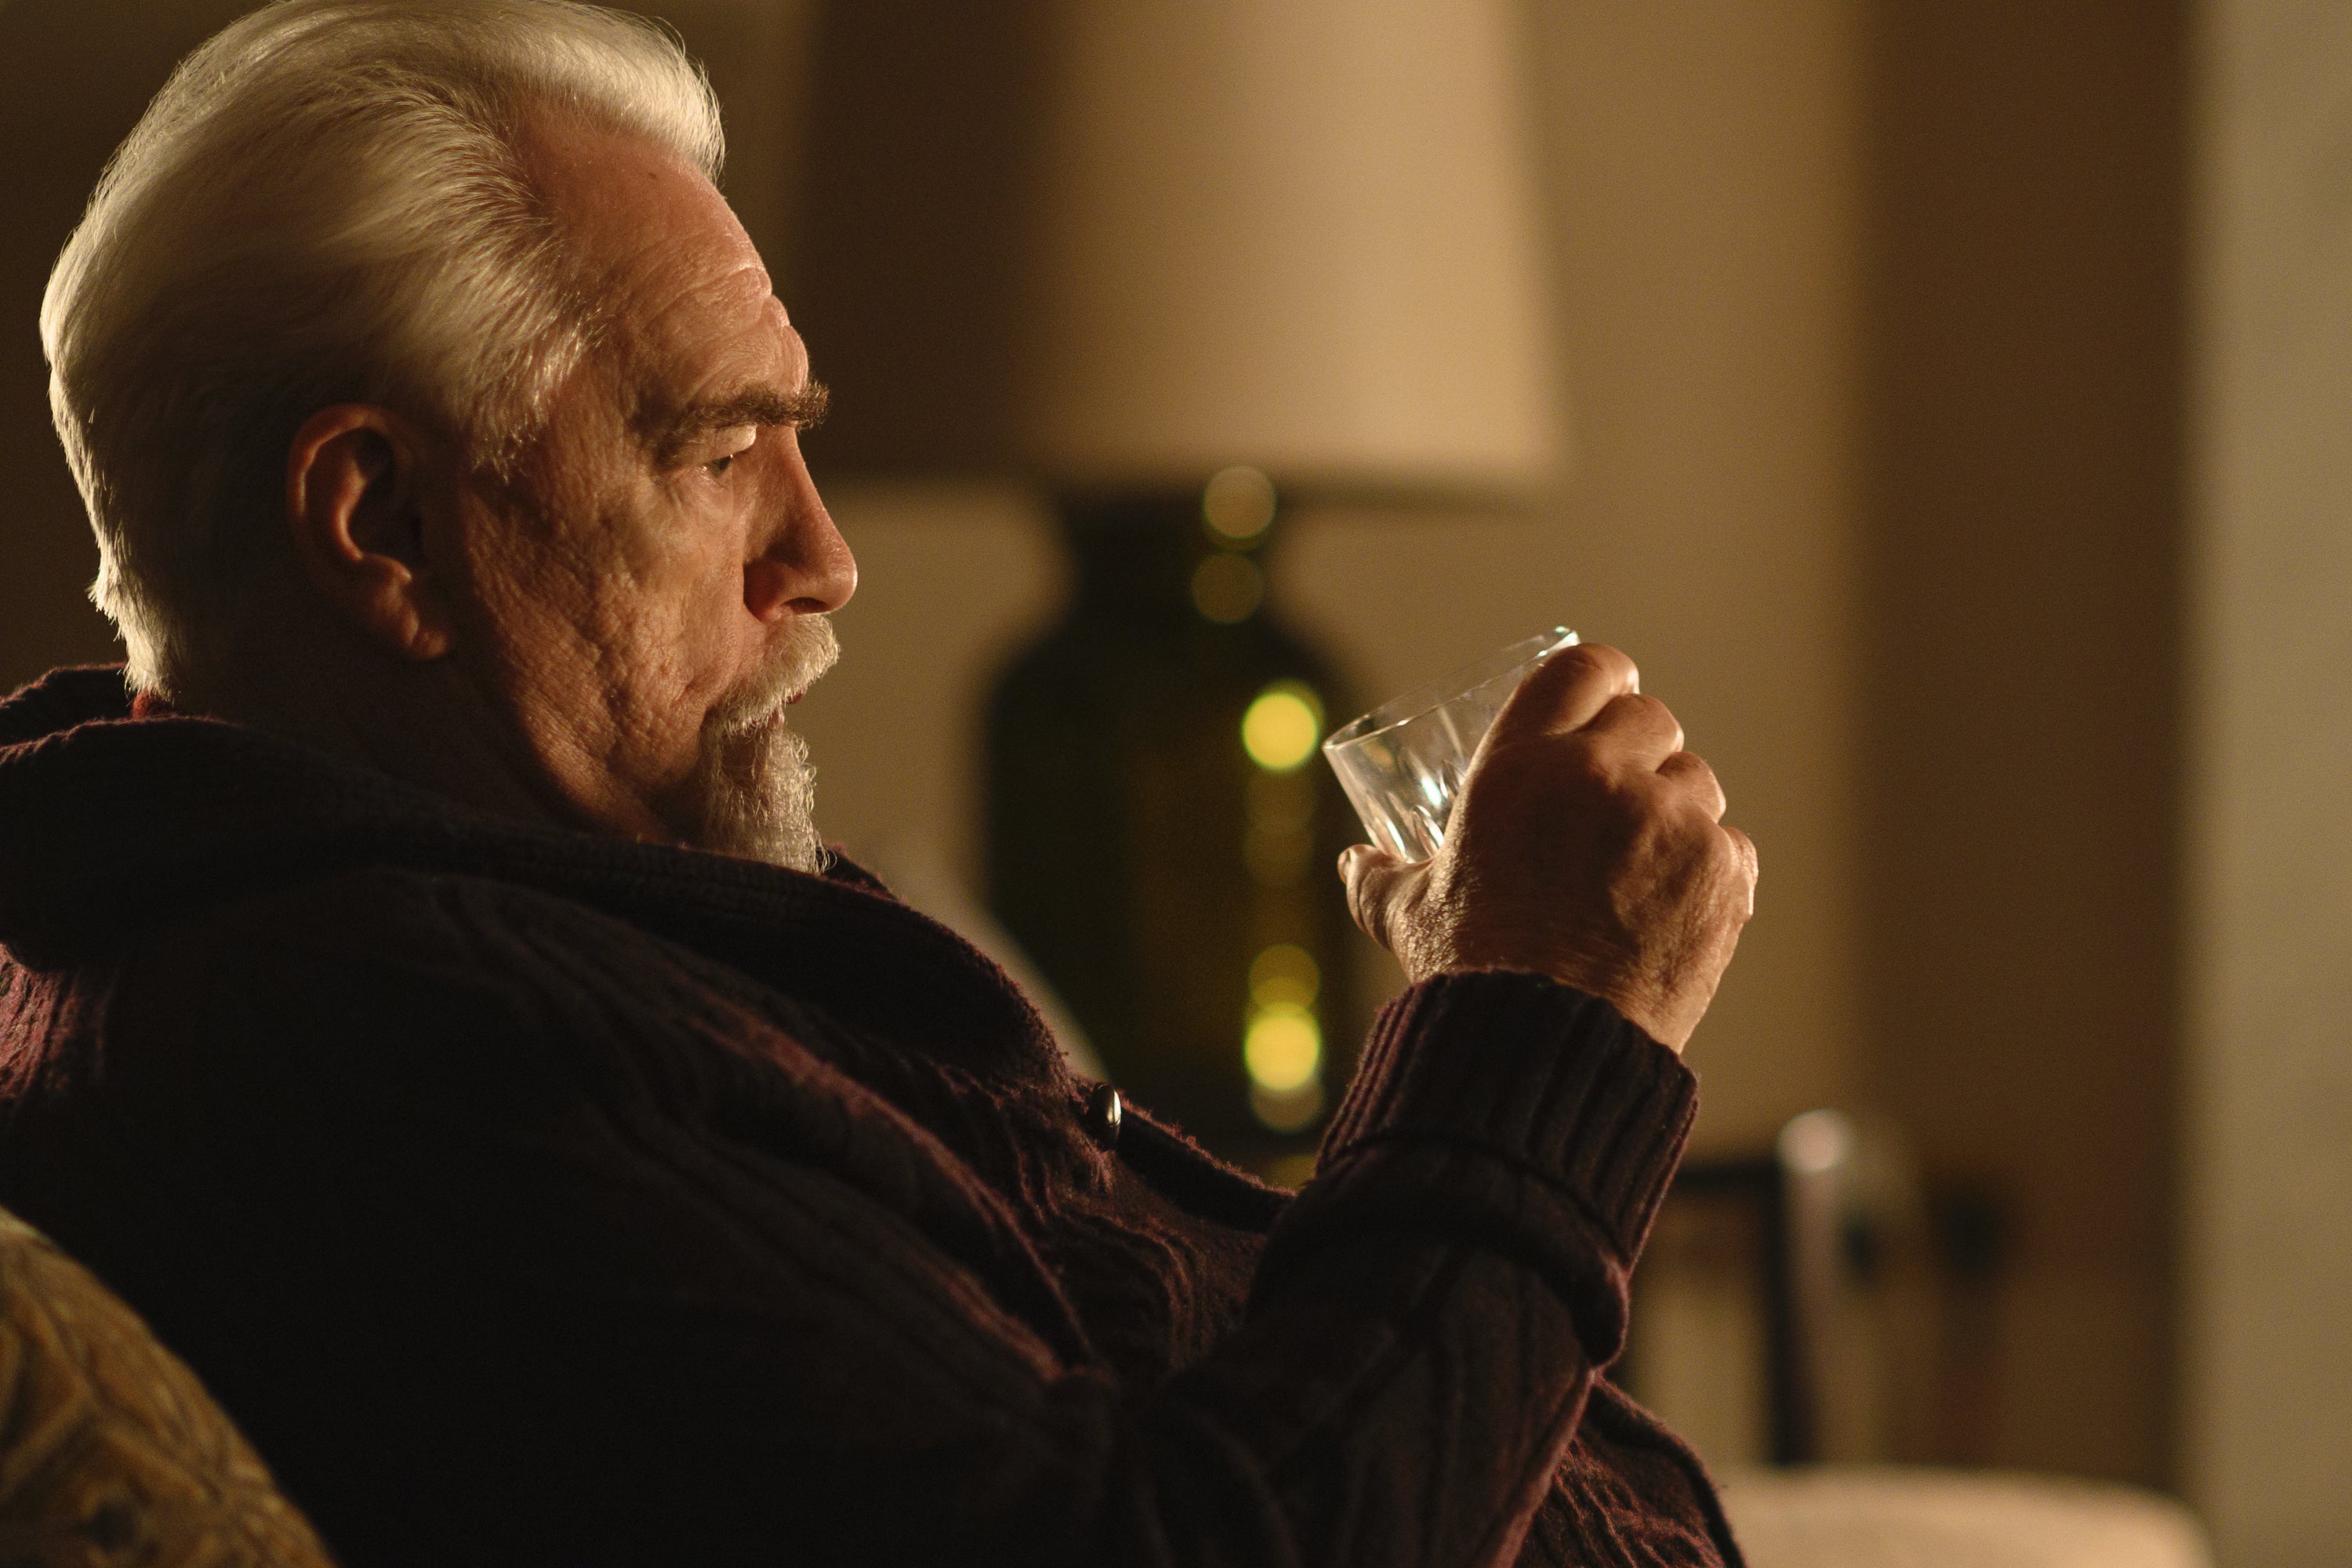 Brian Cox pouts on a couch holding a glass.